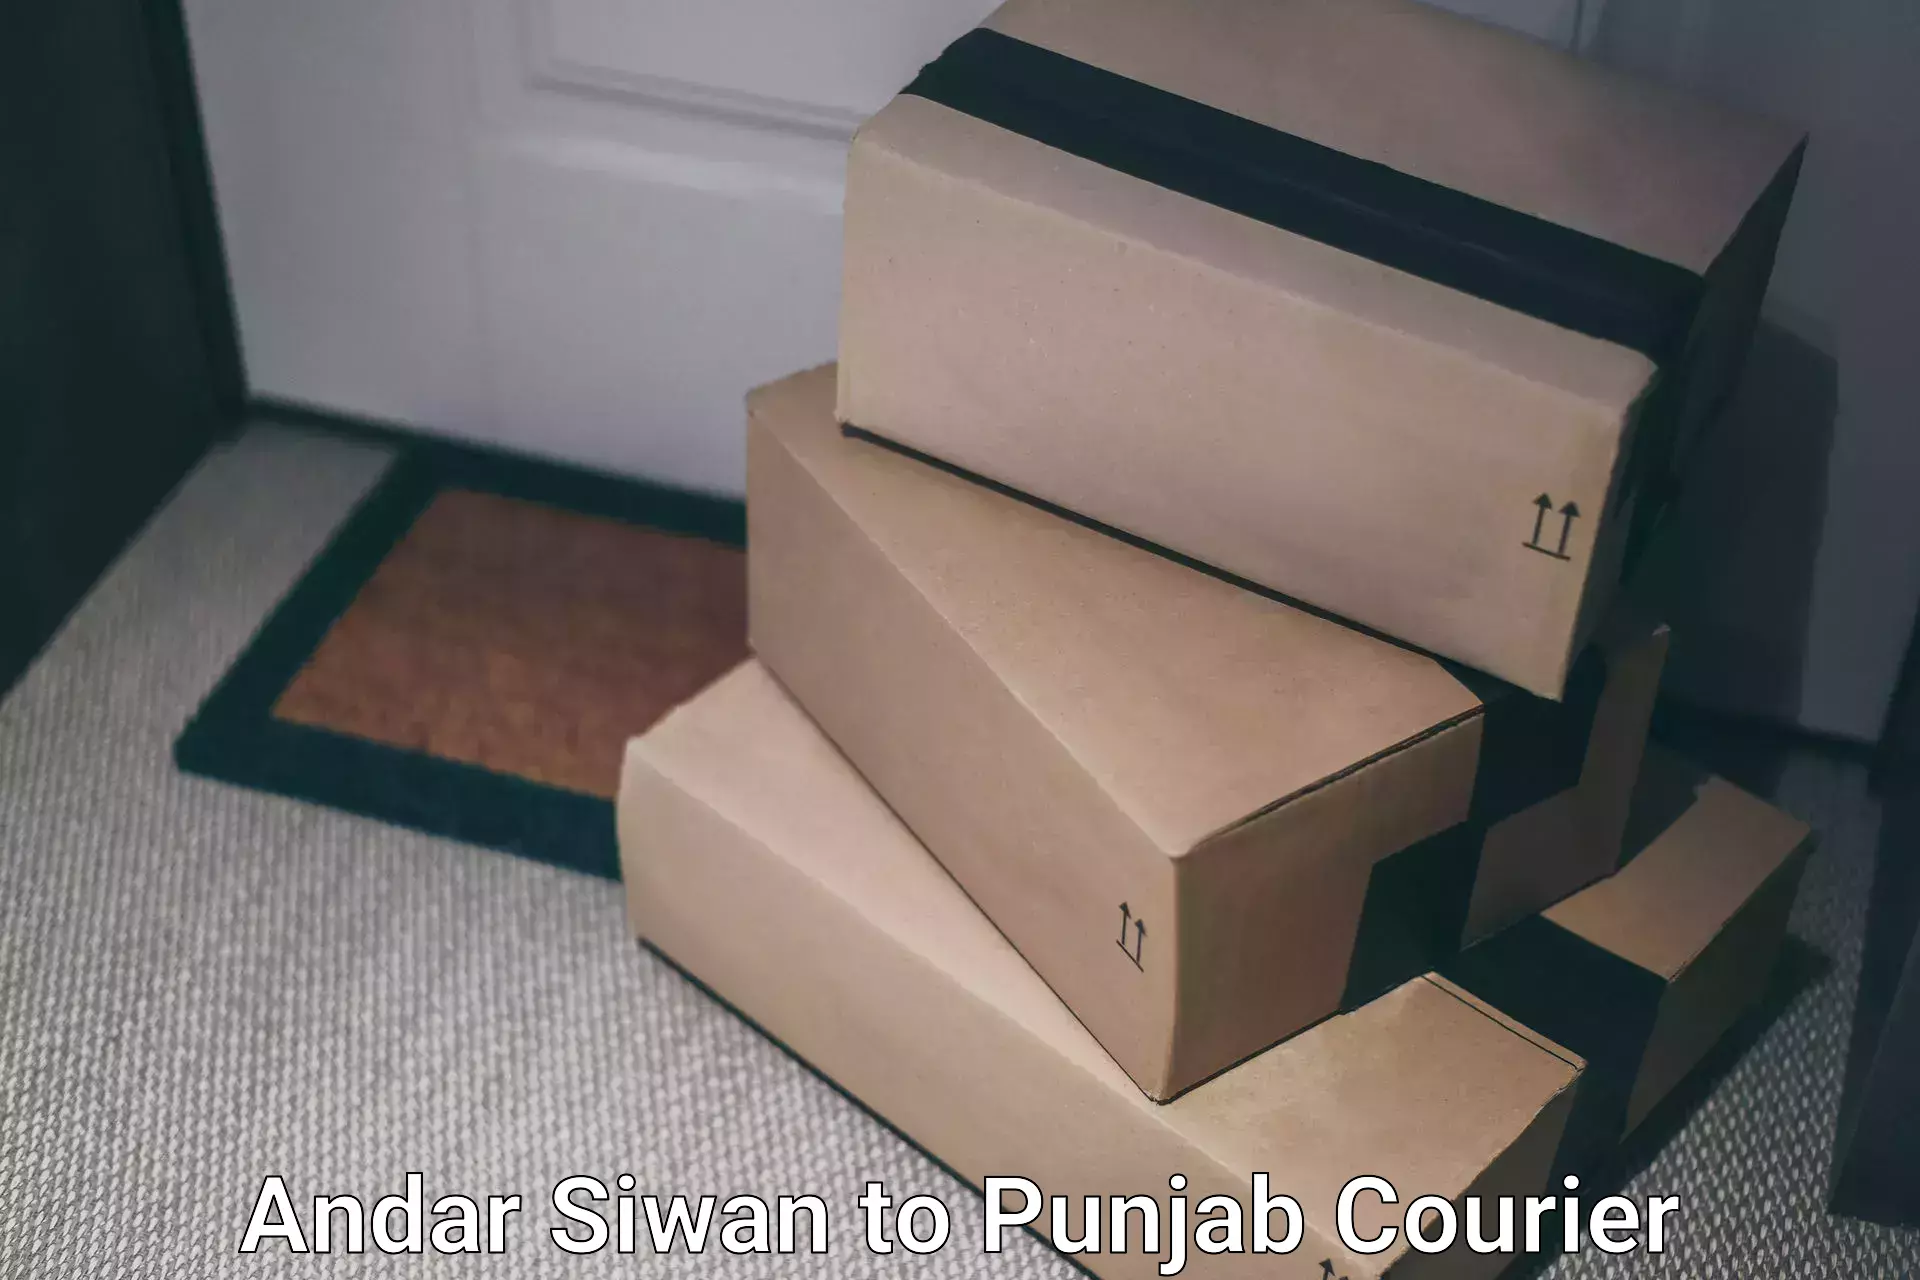 Full-service courier options Andar Siwan to Rajpura